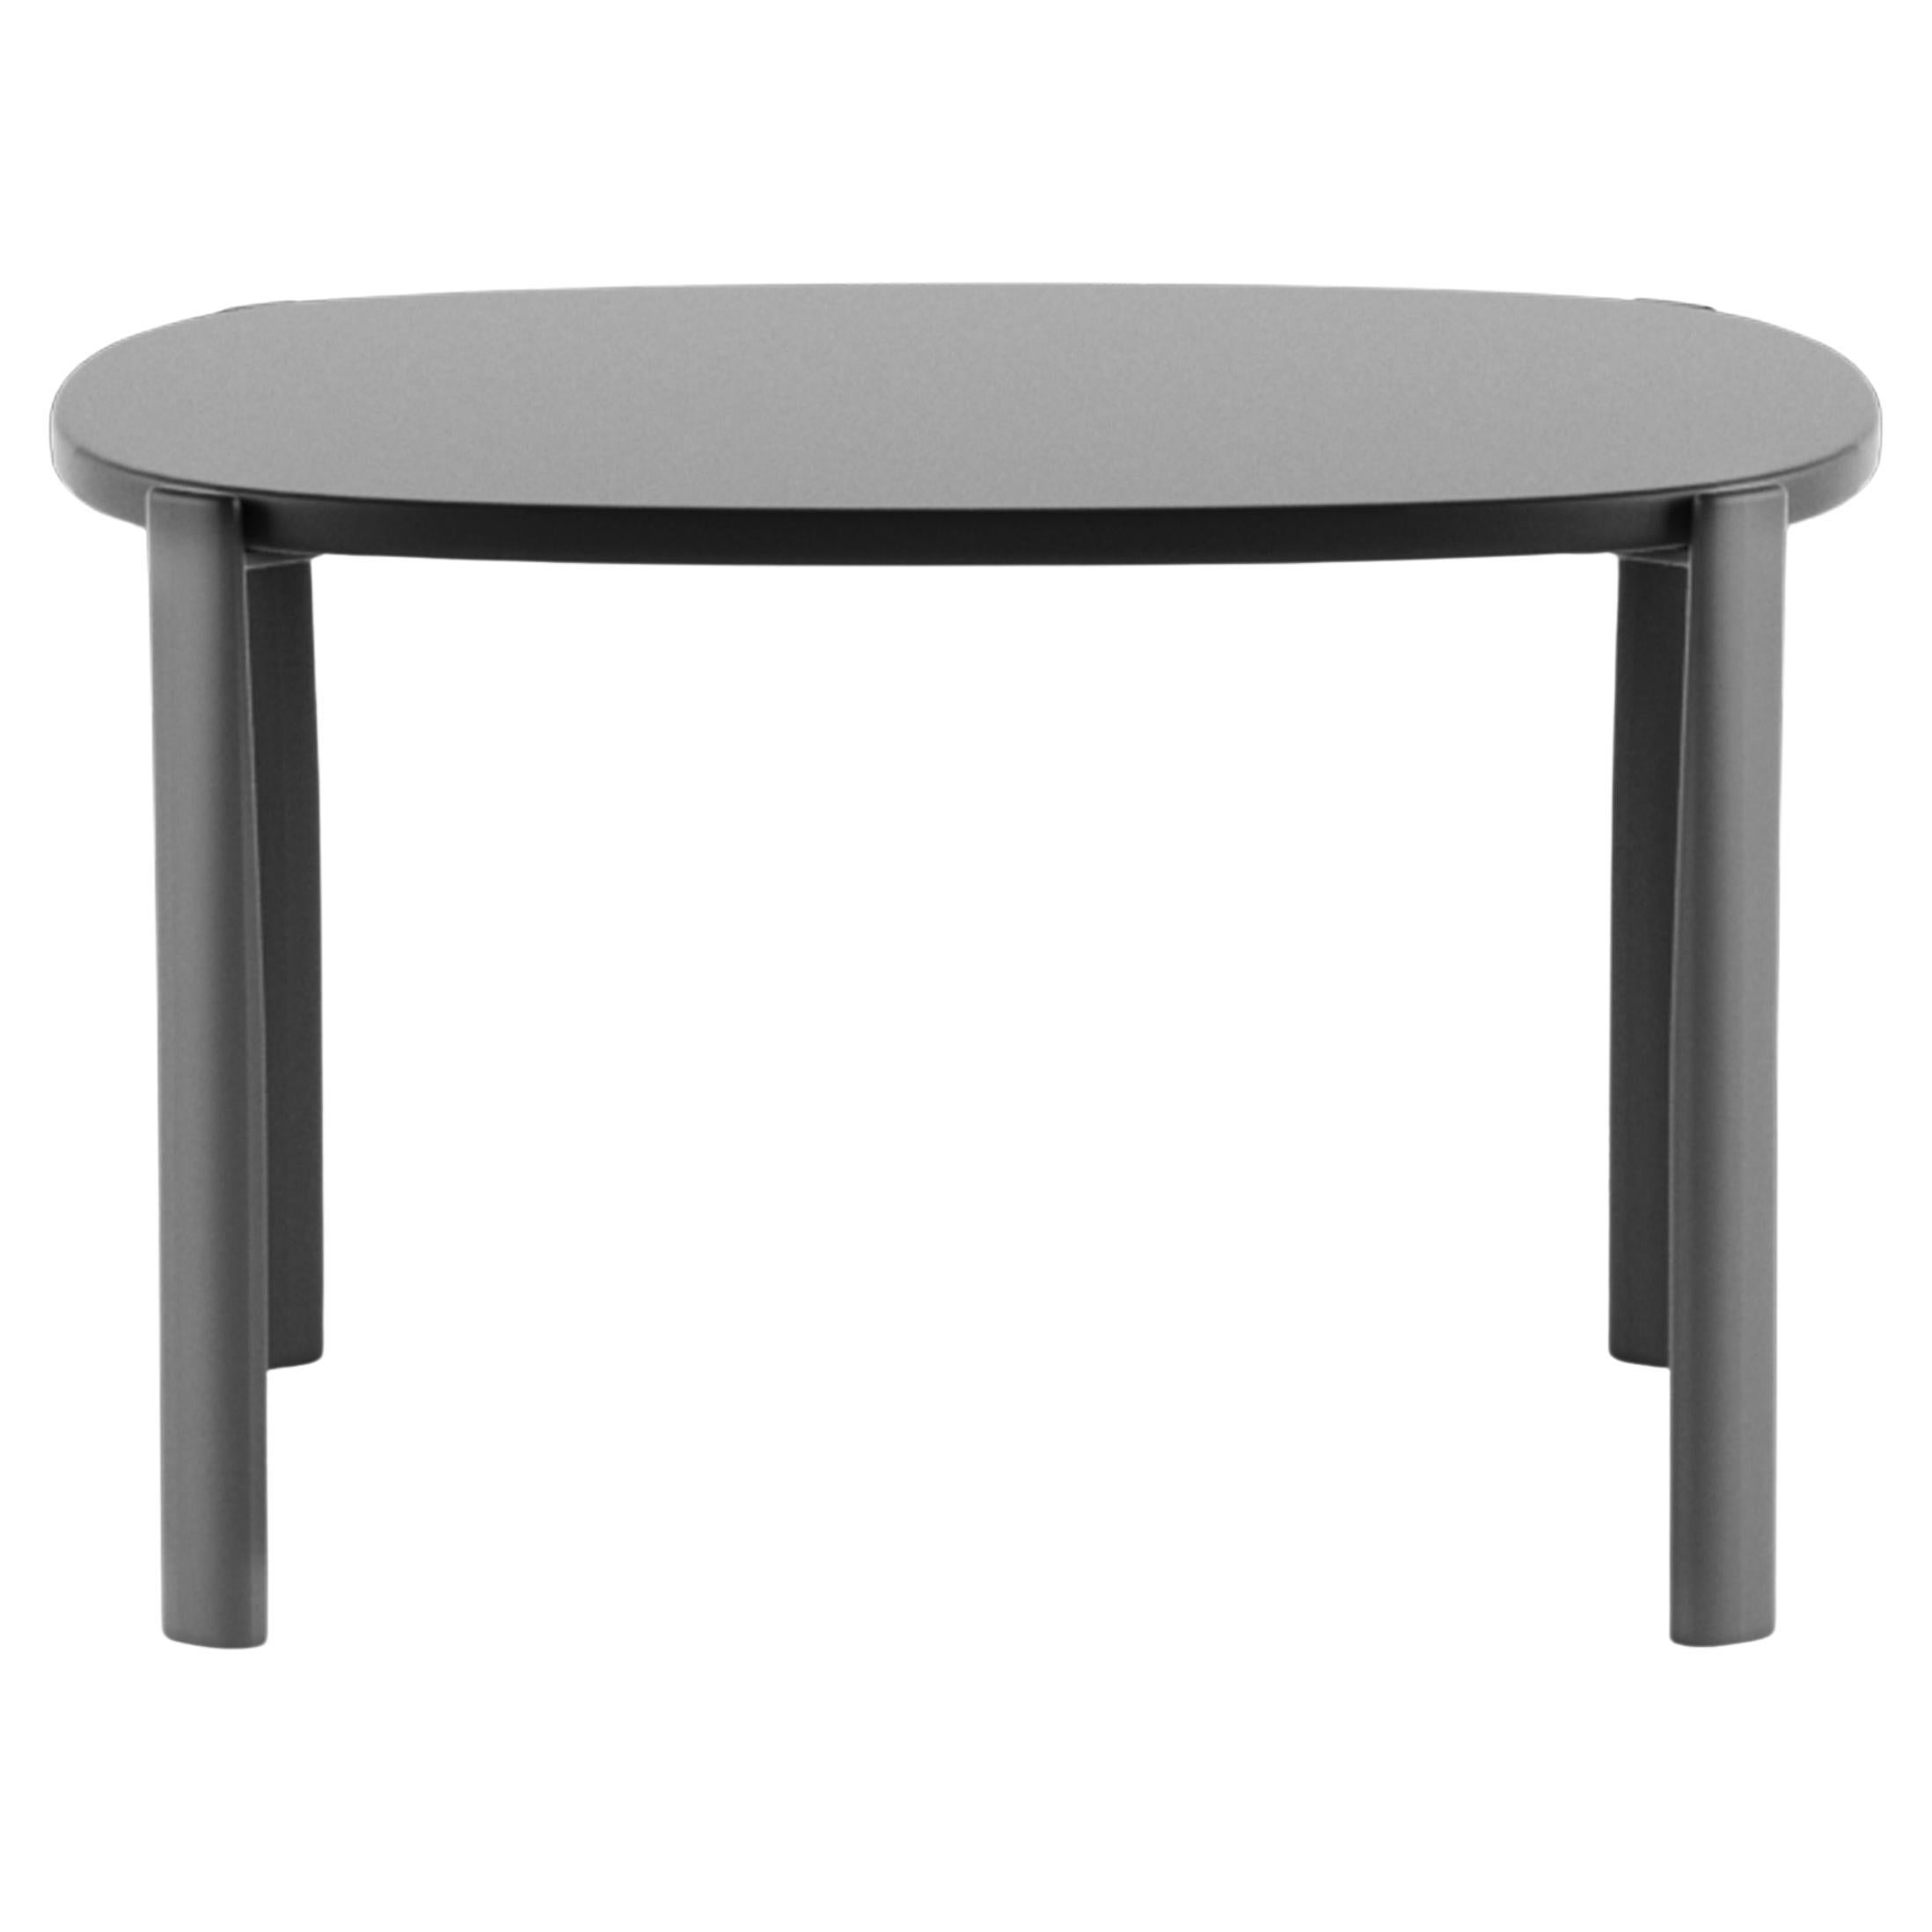 Alias T09_O Ten Outdoor Table 60x60 in Grey Glazed Ceramic Top w Lacquered Frame